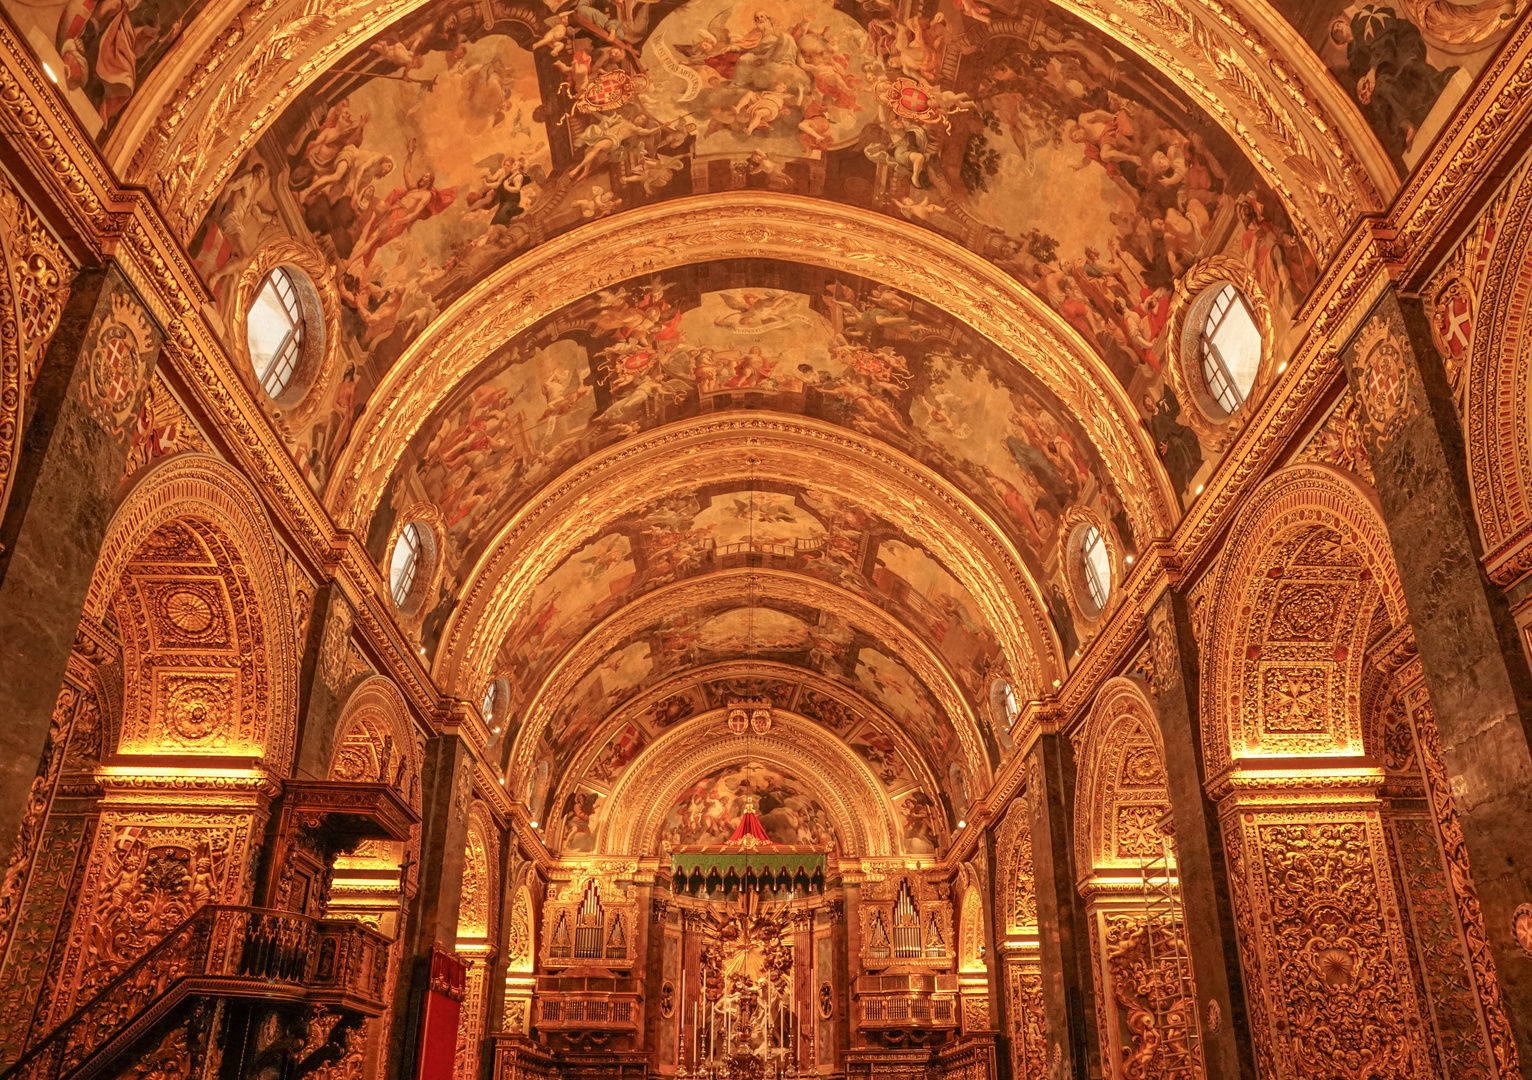 St. John's Cathedral in Valetta